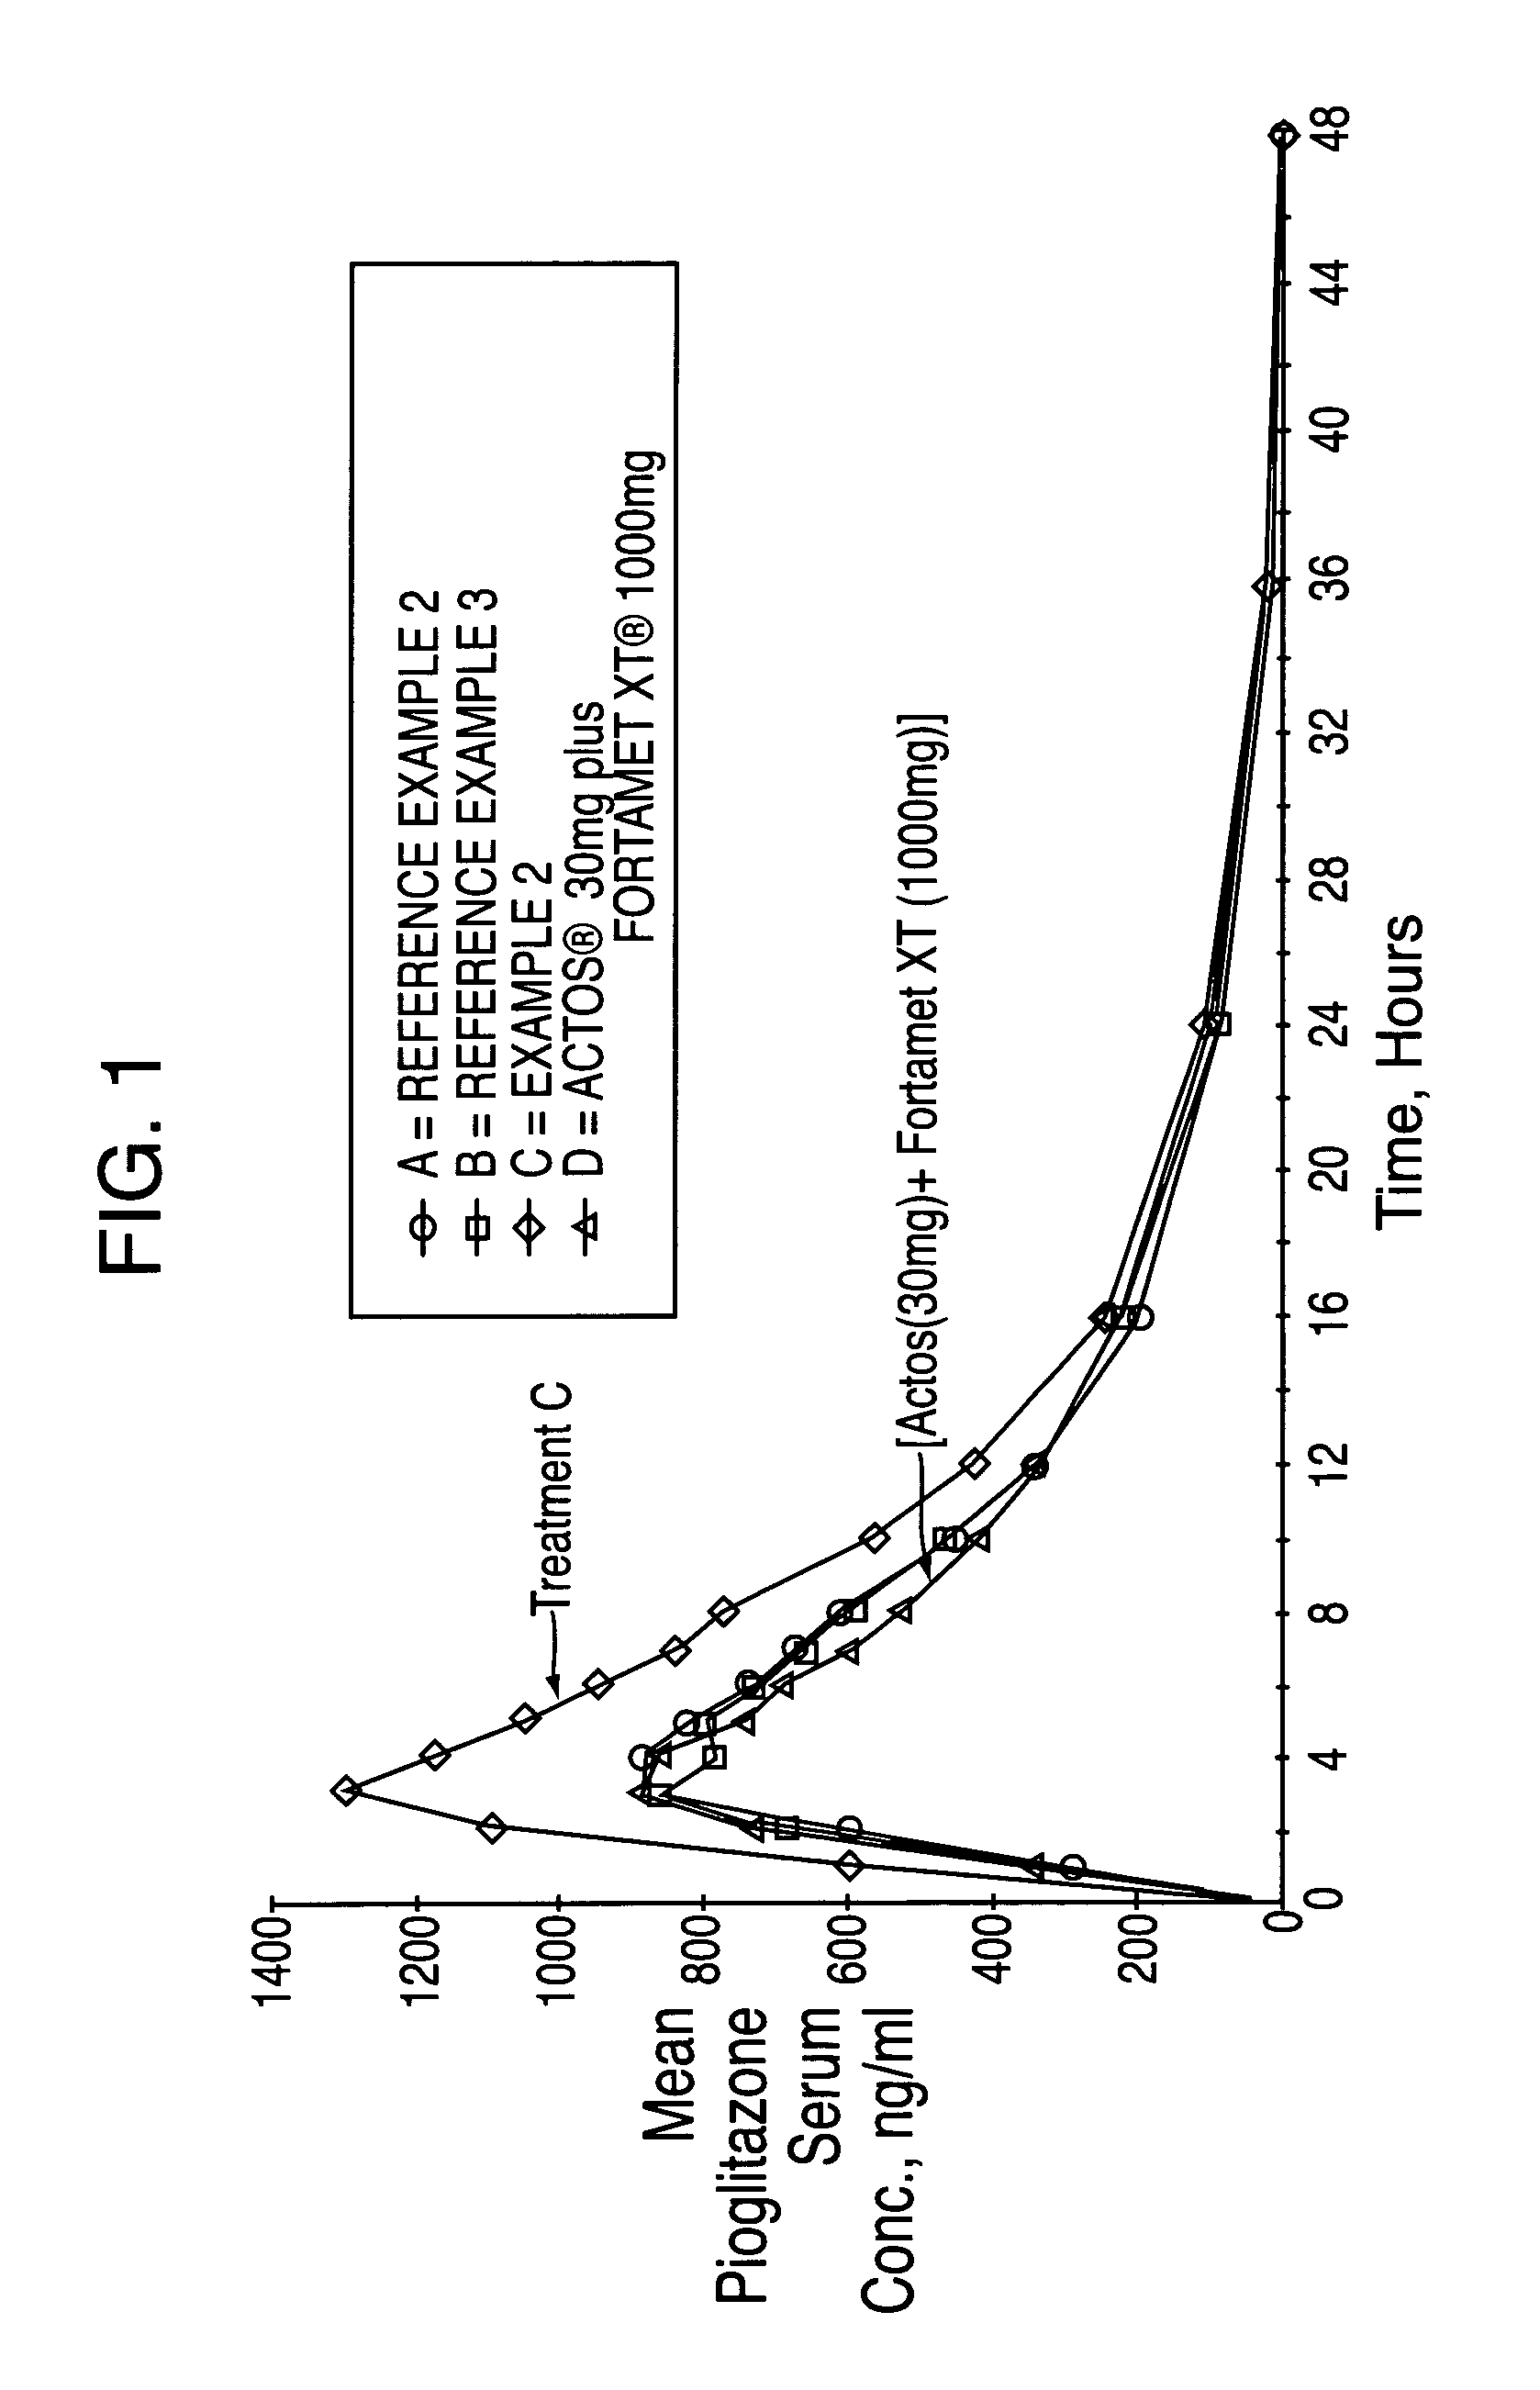 Pharmaceutical formulation containing a biguanide and a thiazolidinedione derivative